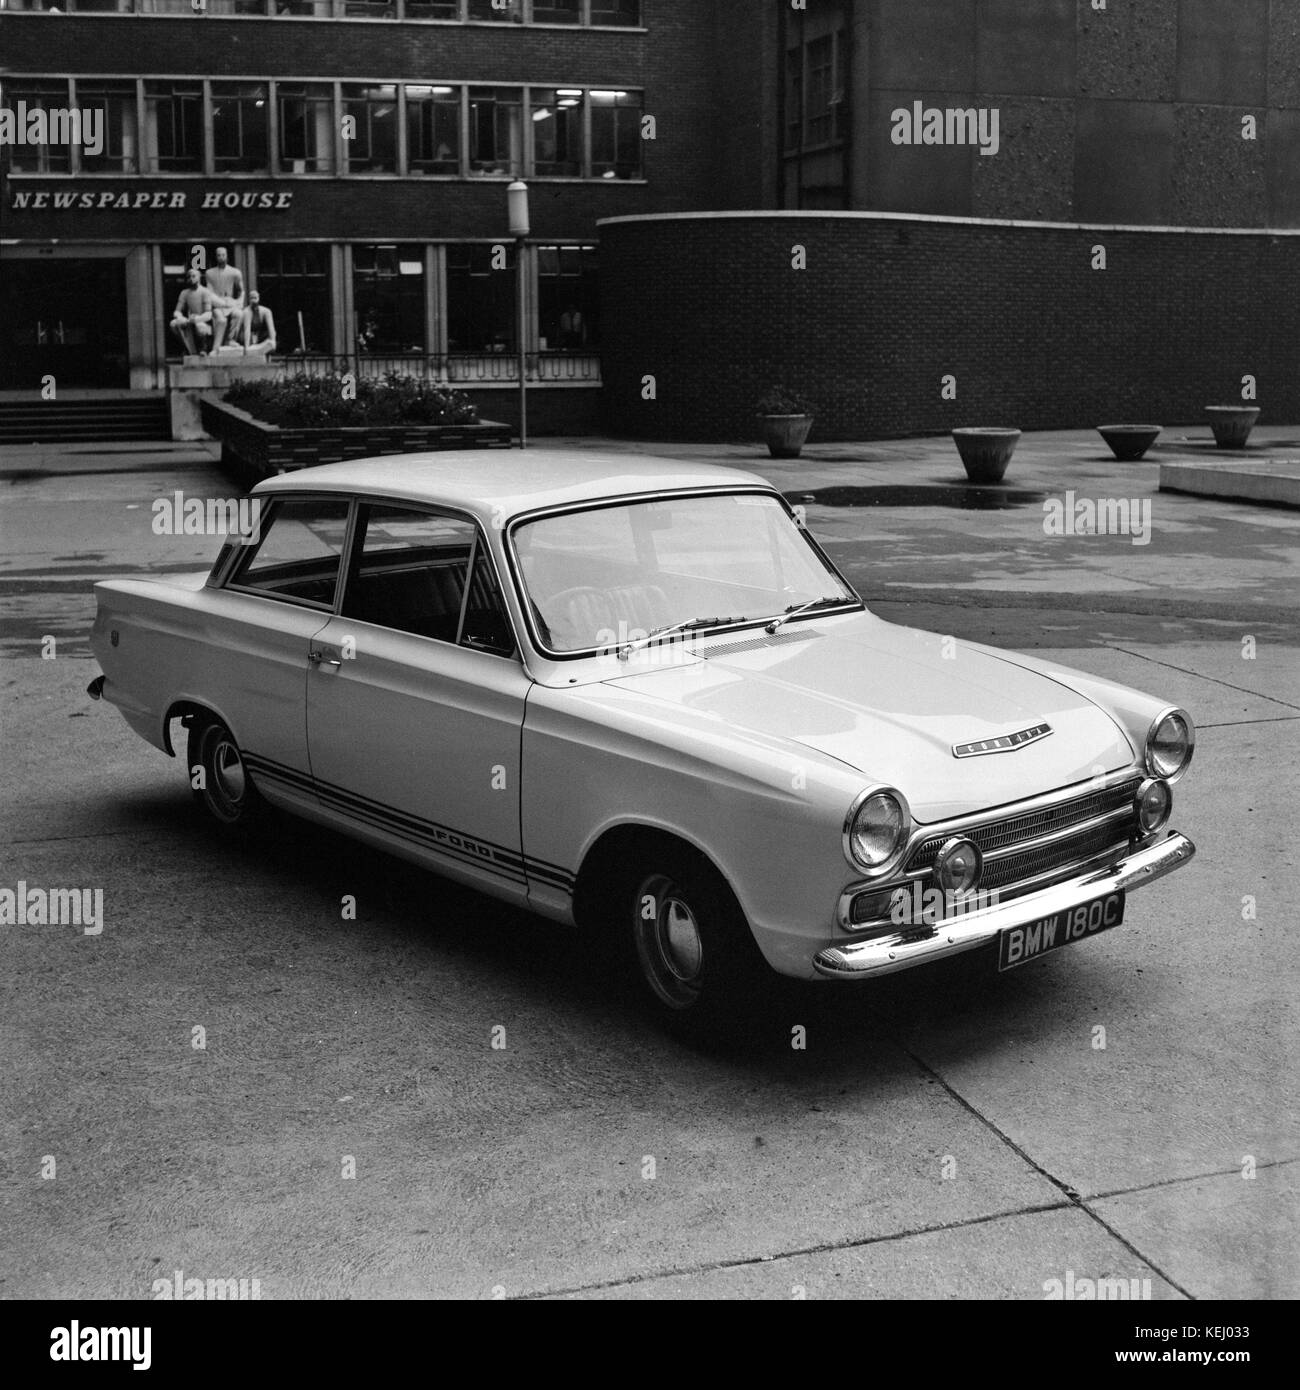 Press photos of a 1966 Ford Cortina Mk 1 GT, shown outside Newspaper House in London. Photos taken on 21st October 1966. Stock Photo